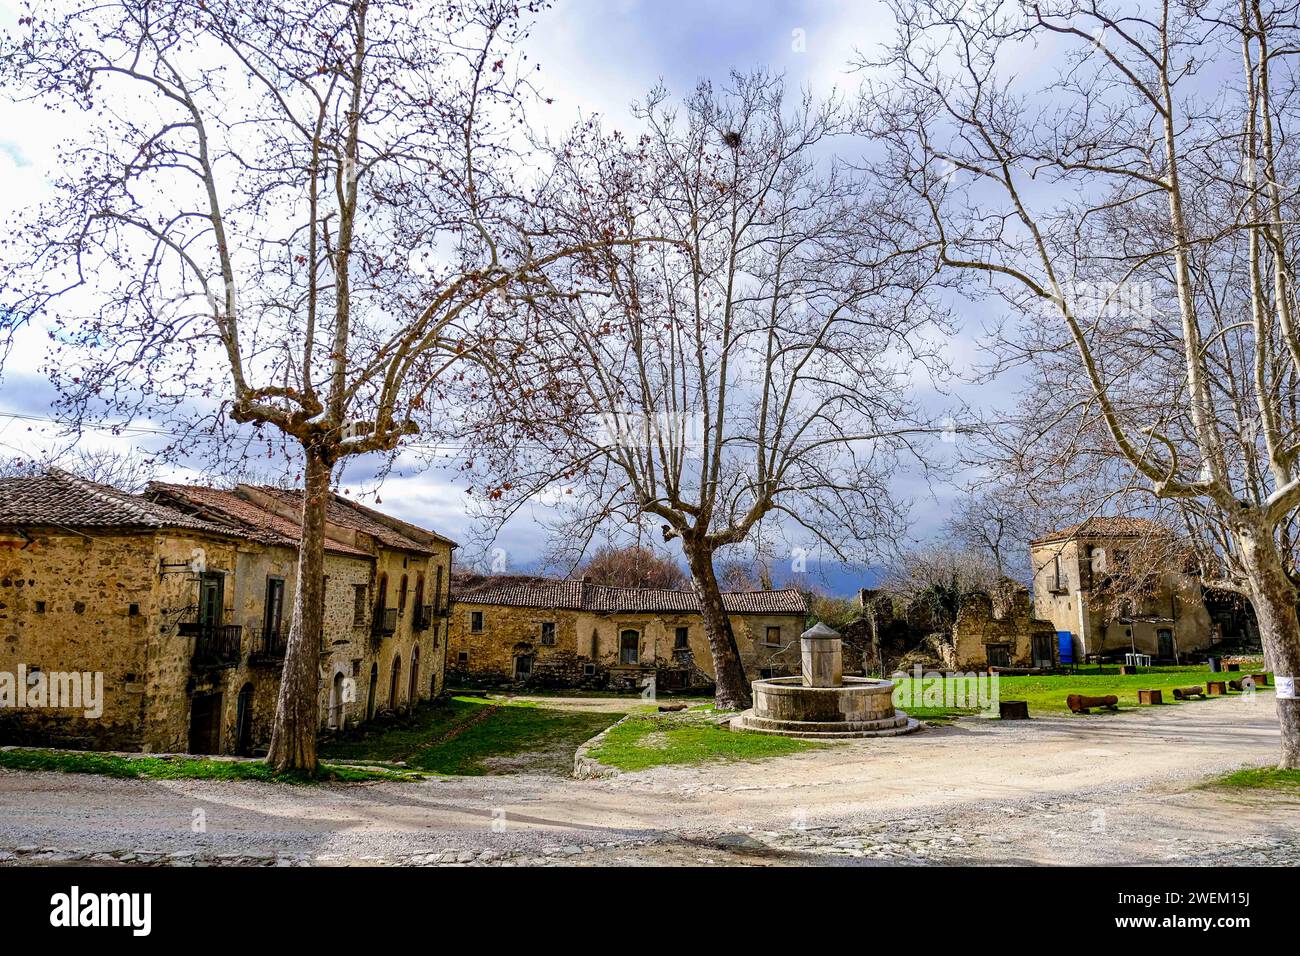 The central square with the village fountain is located in the heart of the Cilento National Park. The village is a veritable open-air museum of the p Stock Photo